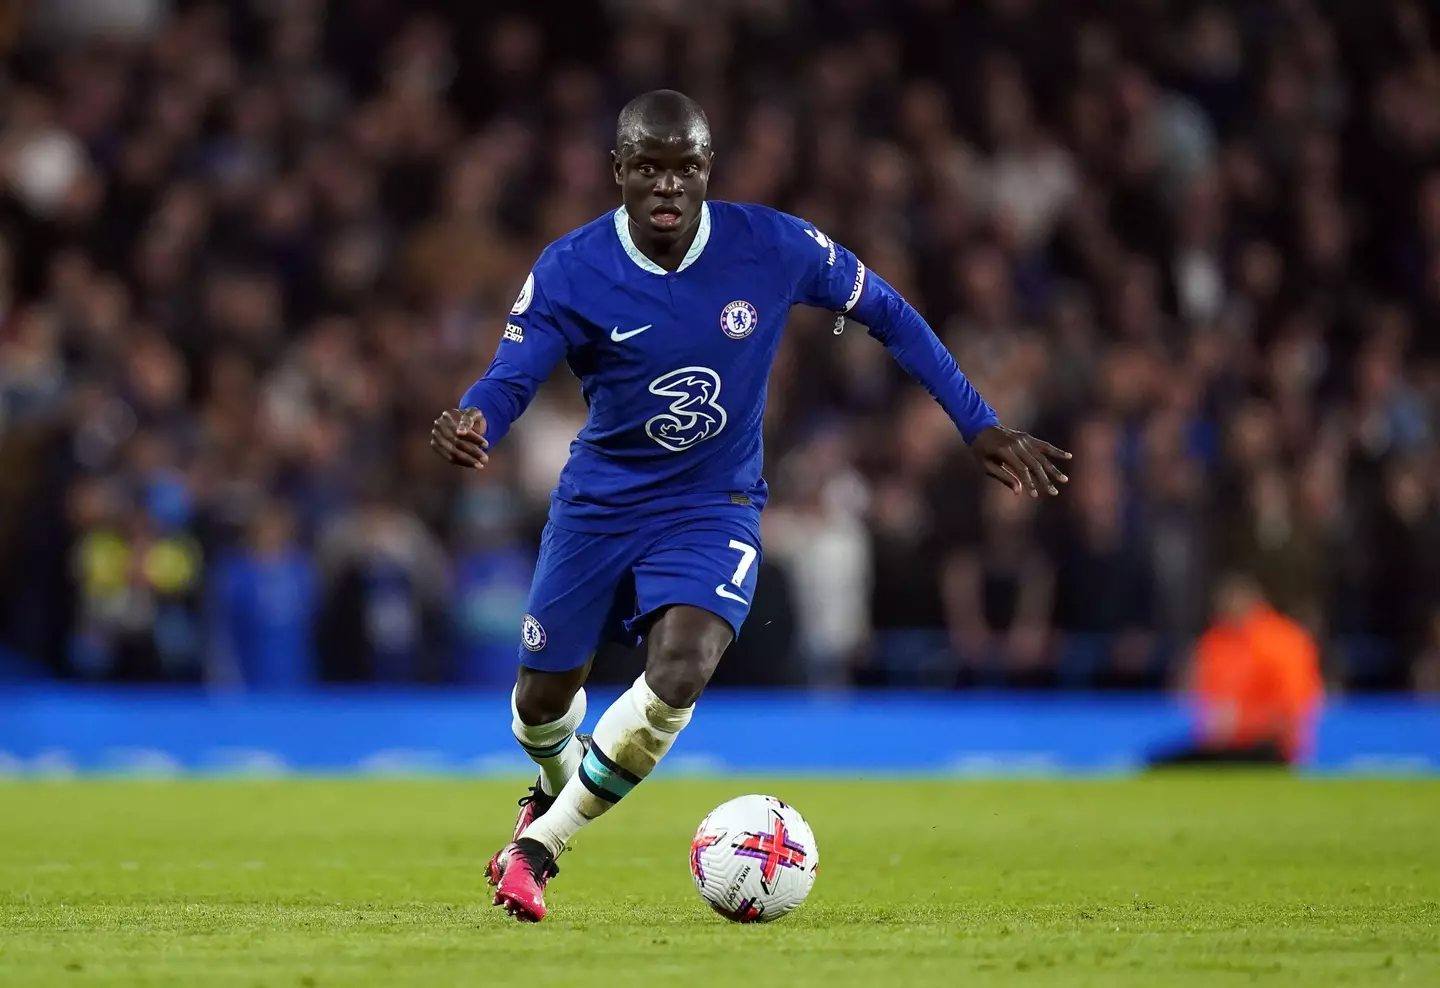 N'Golo Kante in action for Chelsea. Image: Alamy